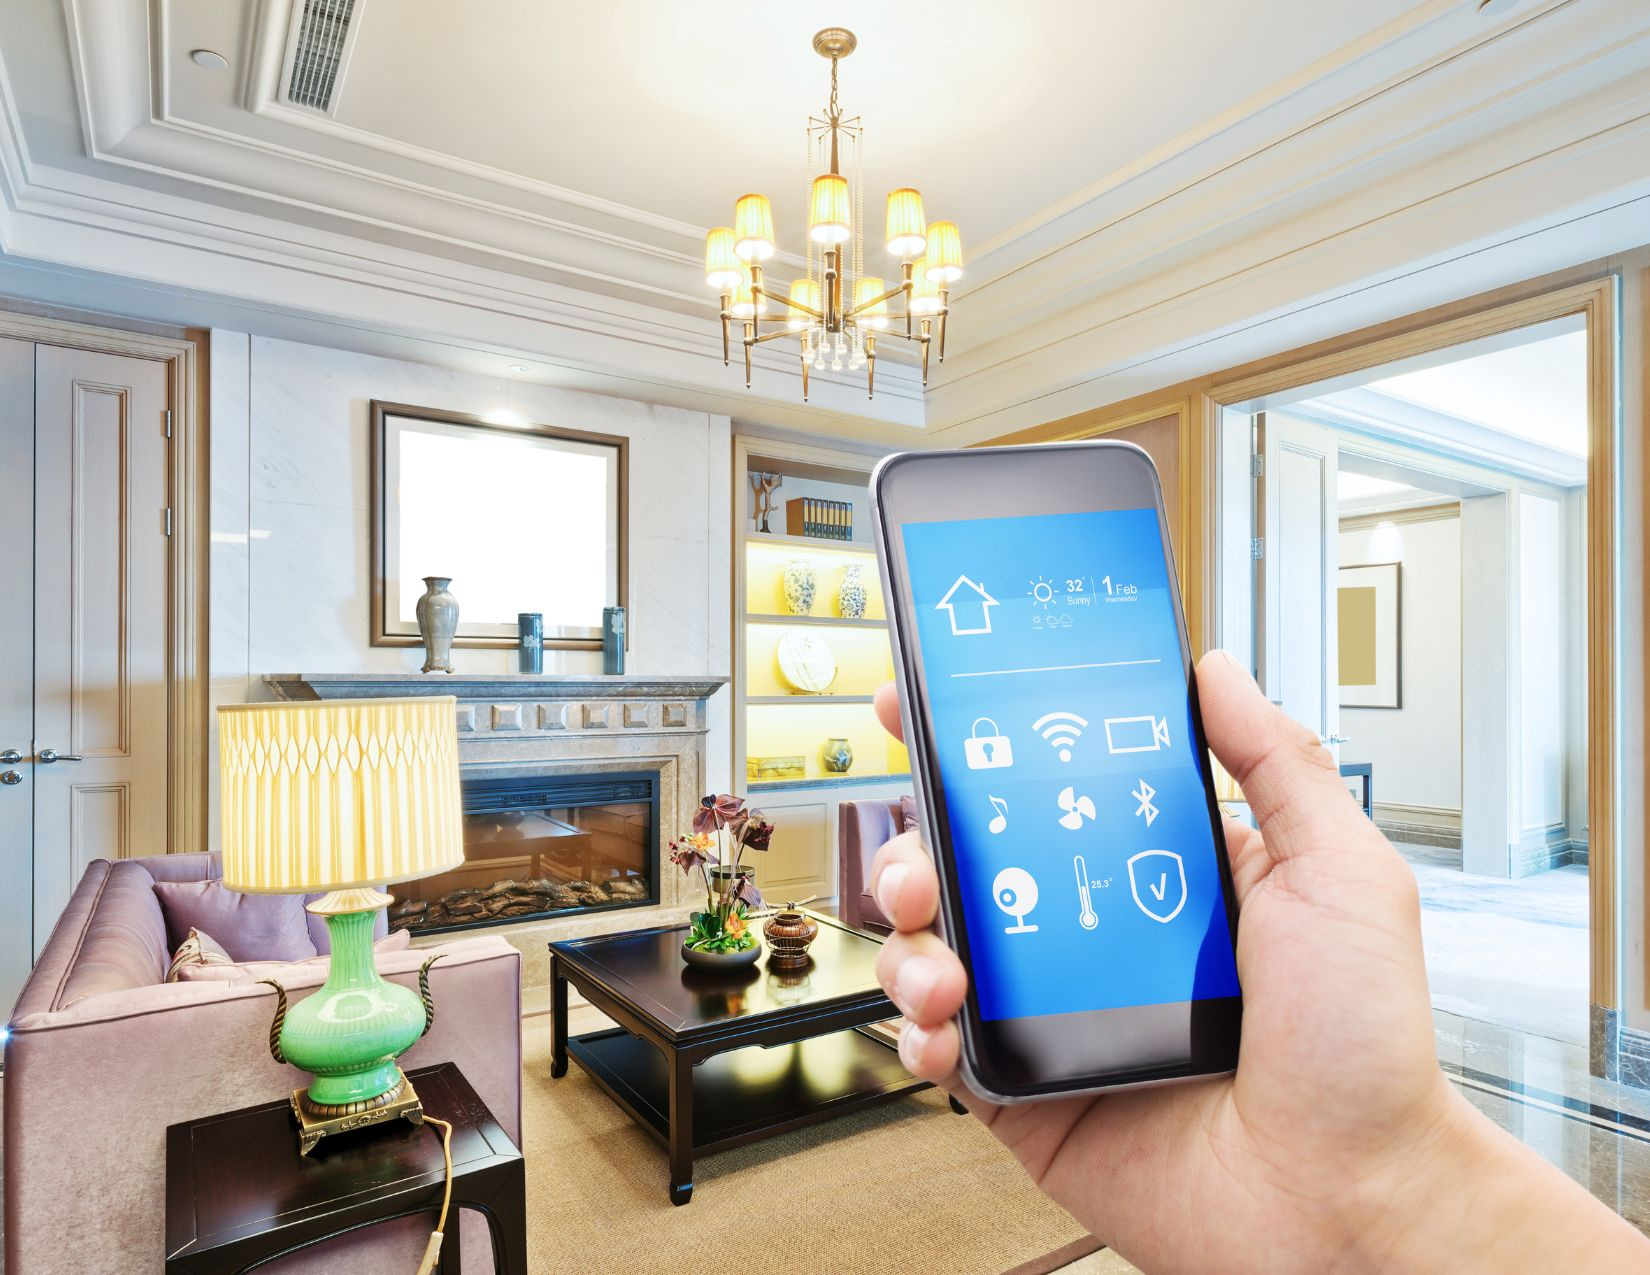 Home Automation – The Fully Automated Smart Home